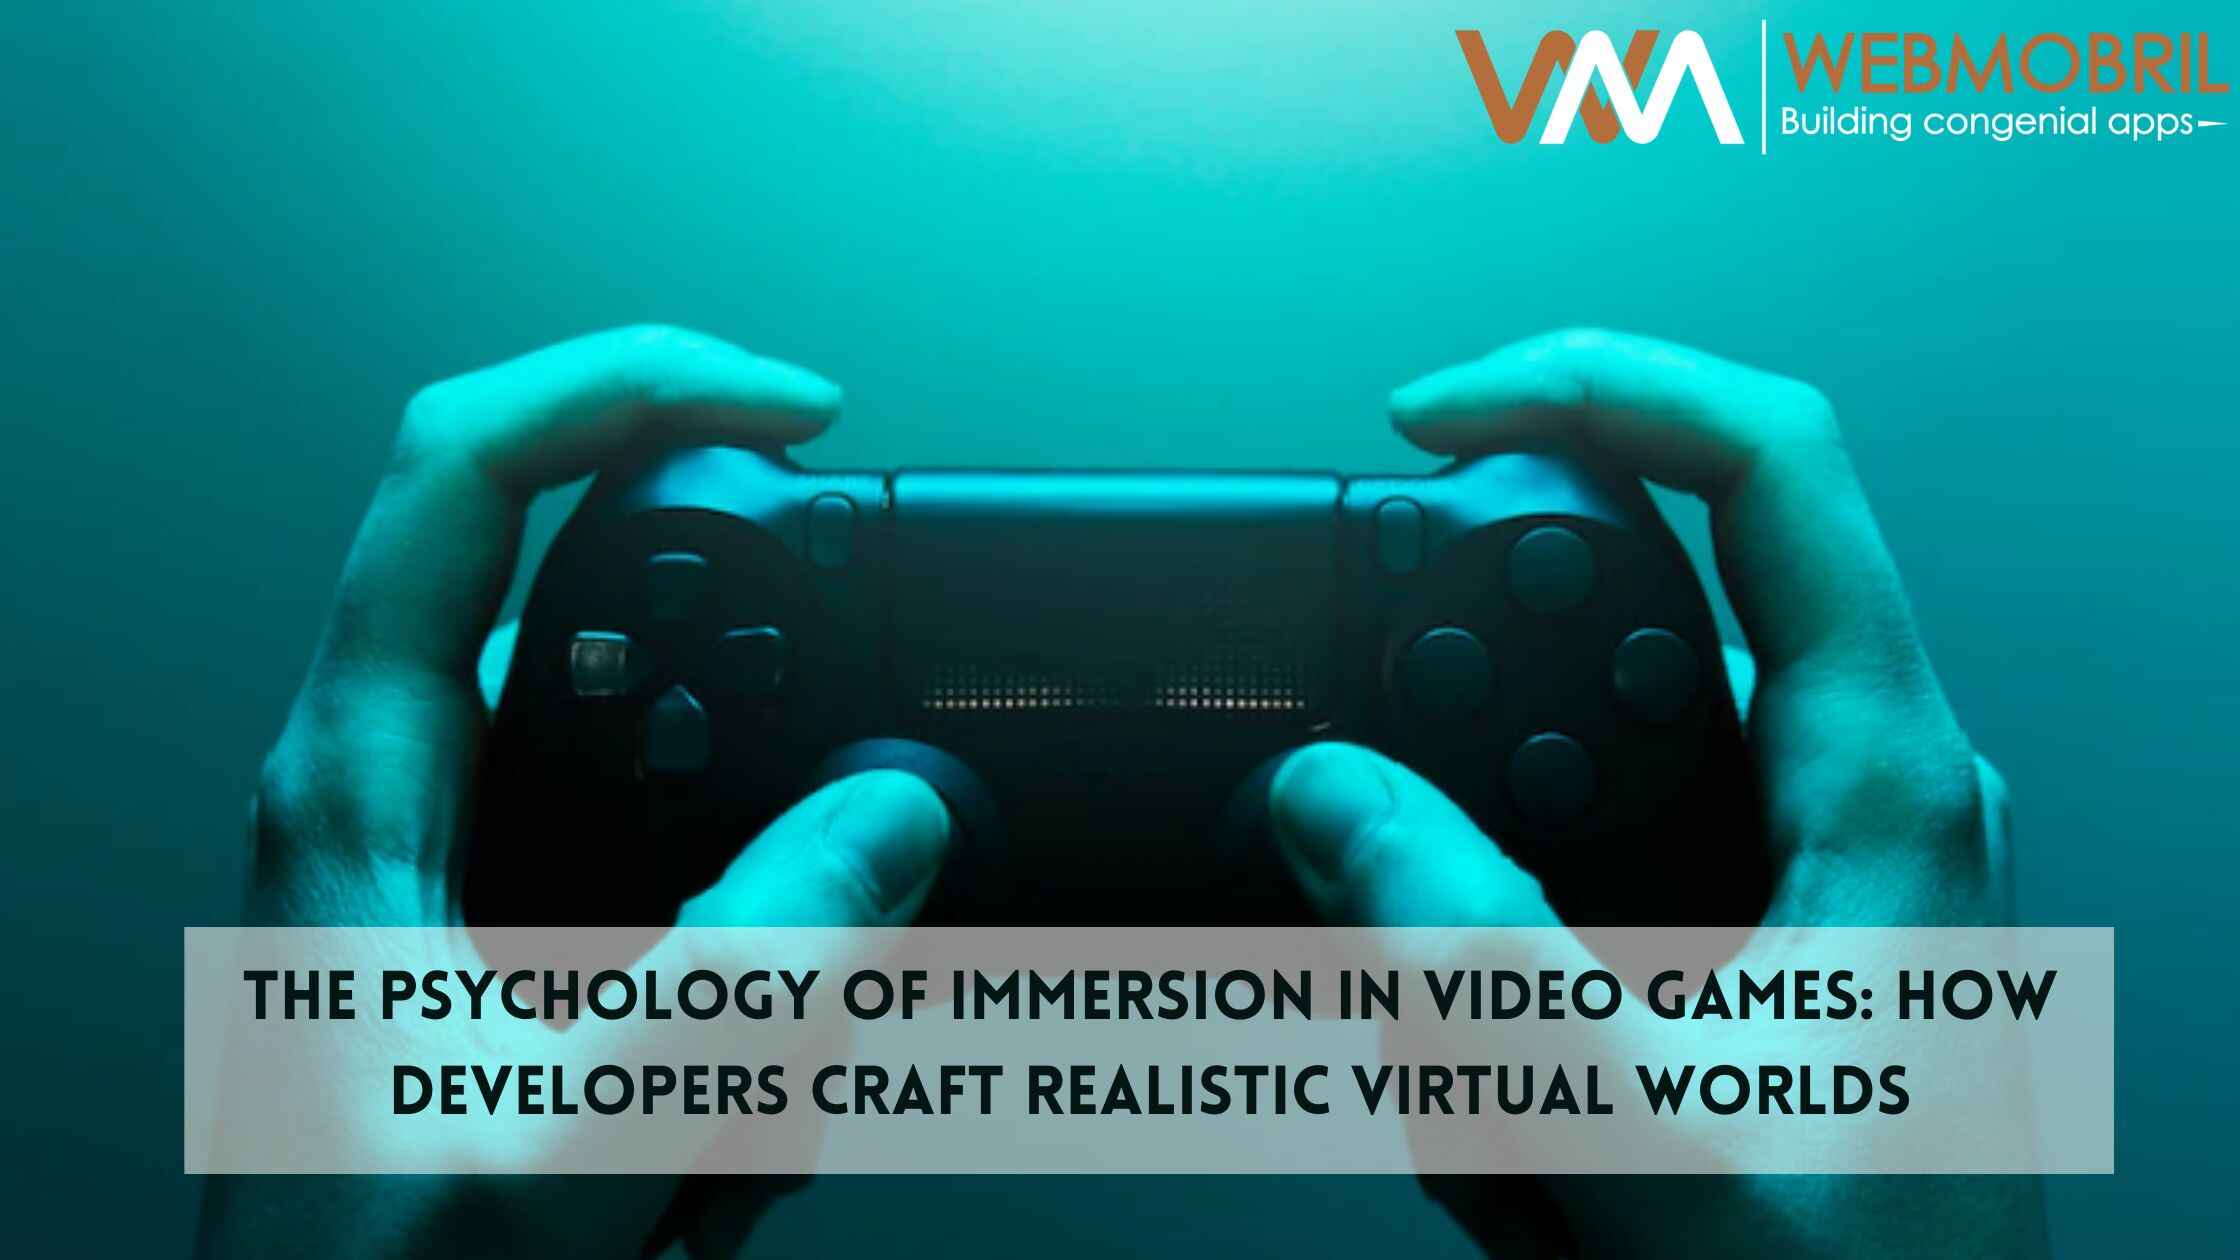 The Psychology of Immersion in Video Games: How Developers Craft Realistic Virtual Worlds